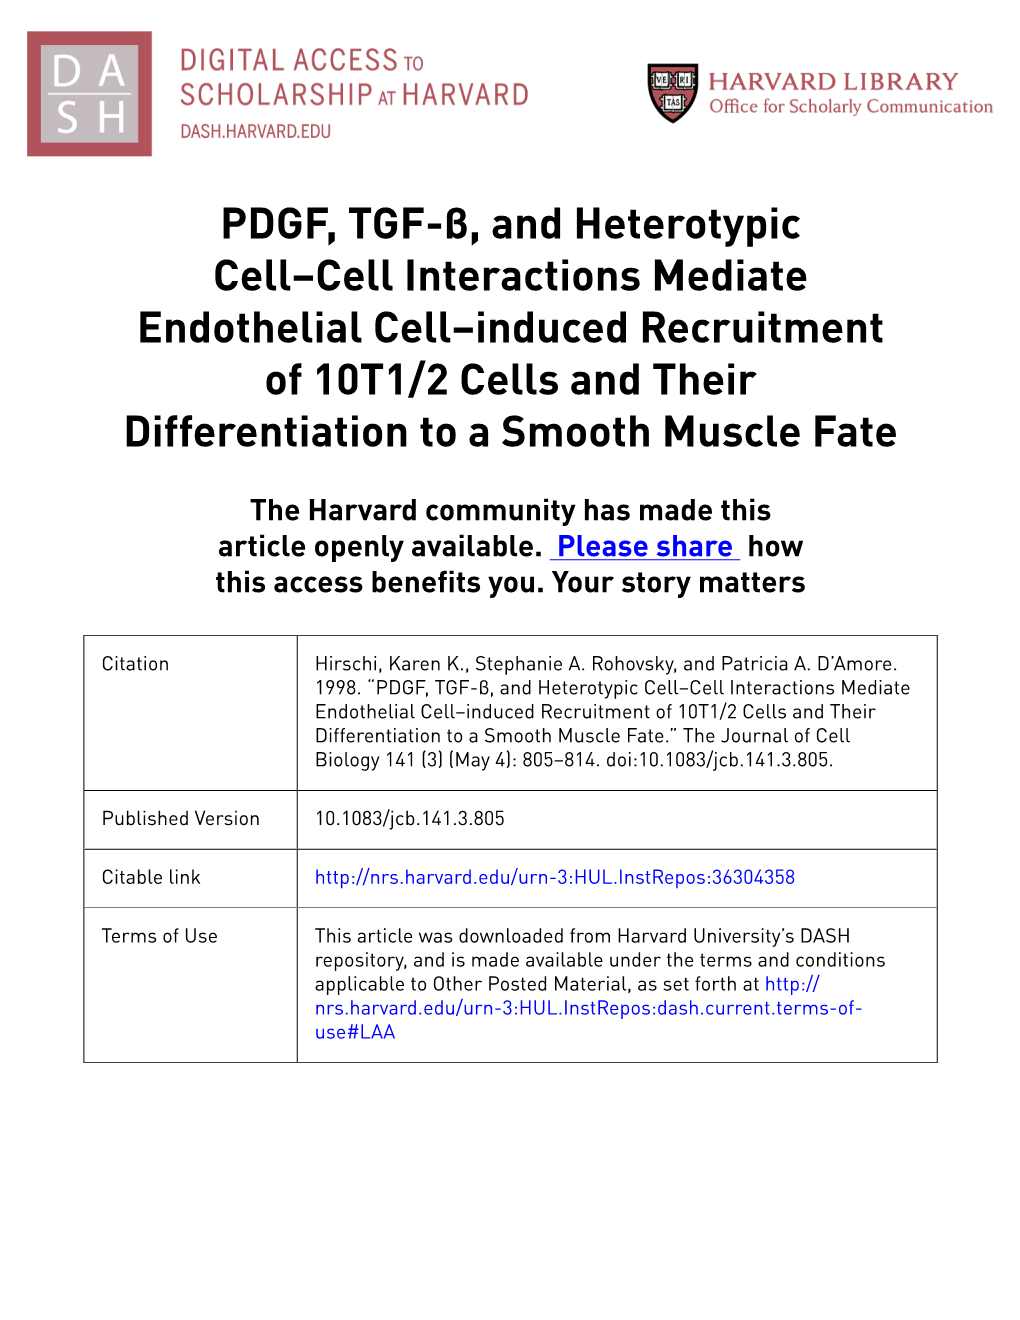 PDGF, TGF-Β, and Heterotypic Cell–Cell Interactions Mediate Endothelial Cell–Induced Recruitment of 10T1/2 Cells and Their Differentiation to a Smooth Muscle Fate